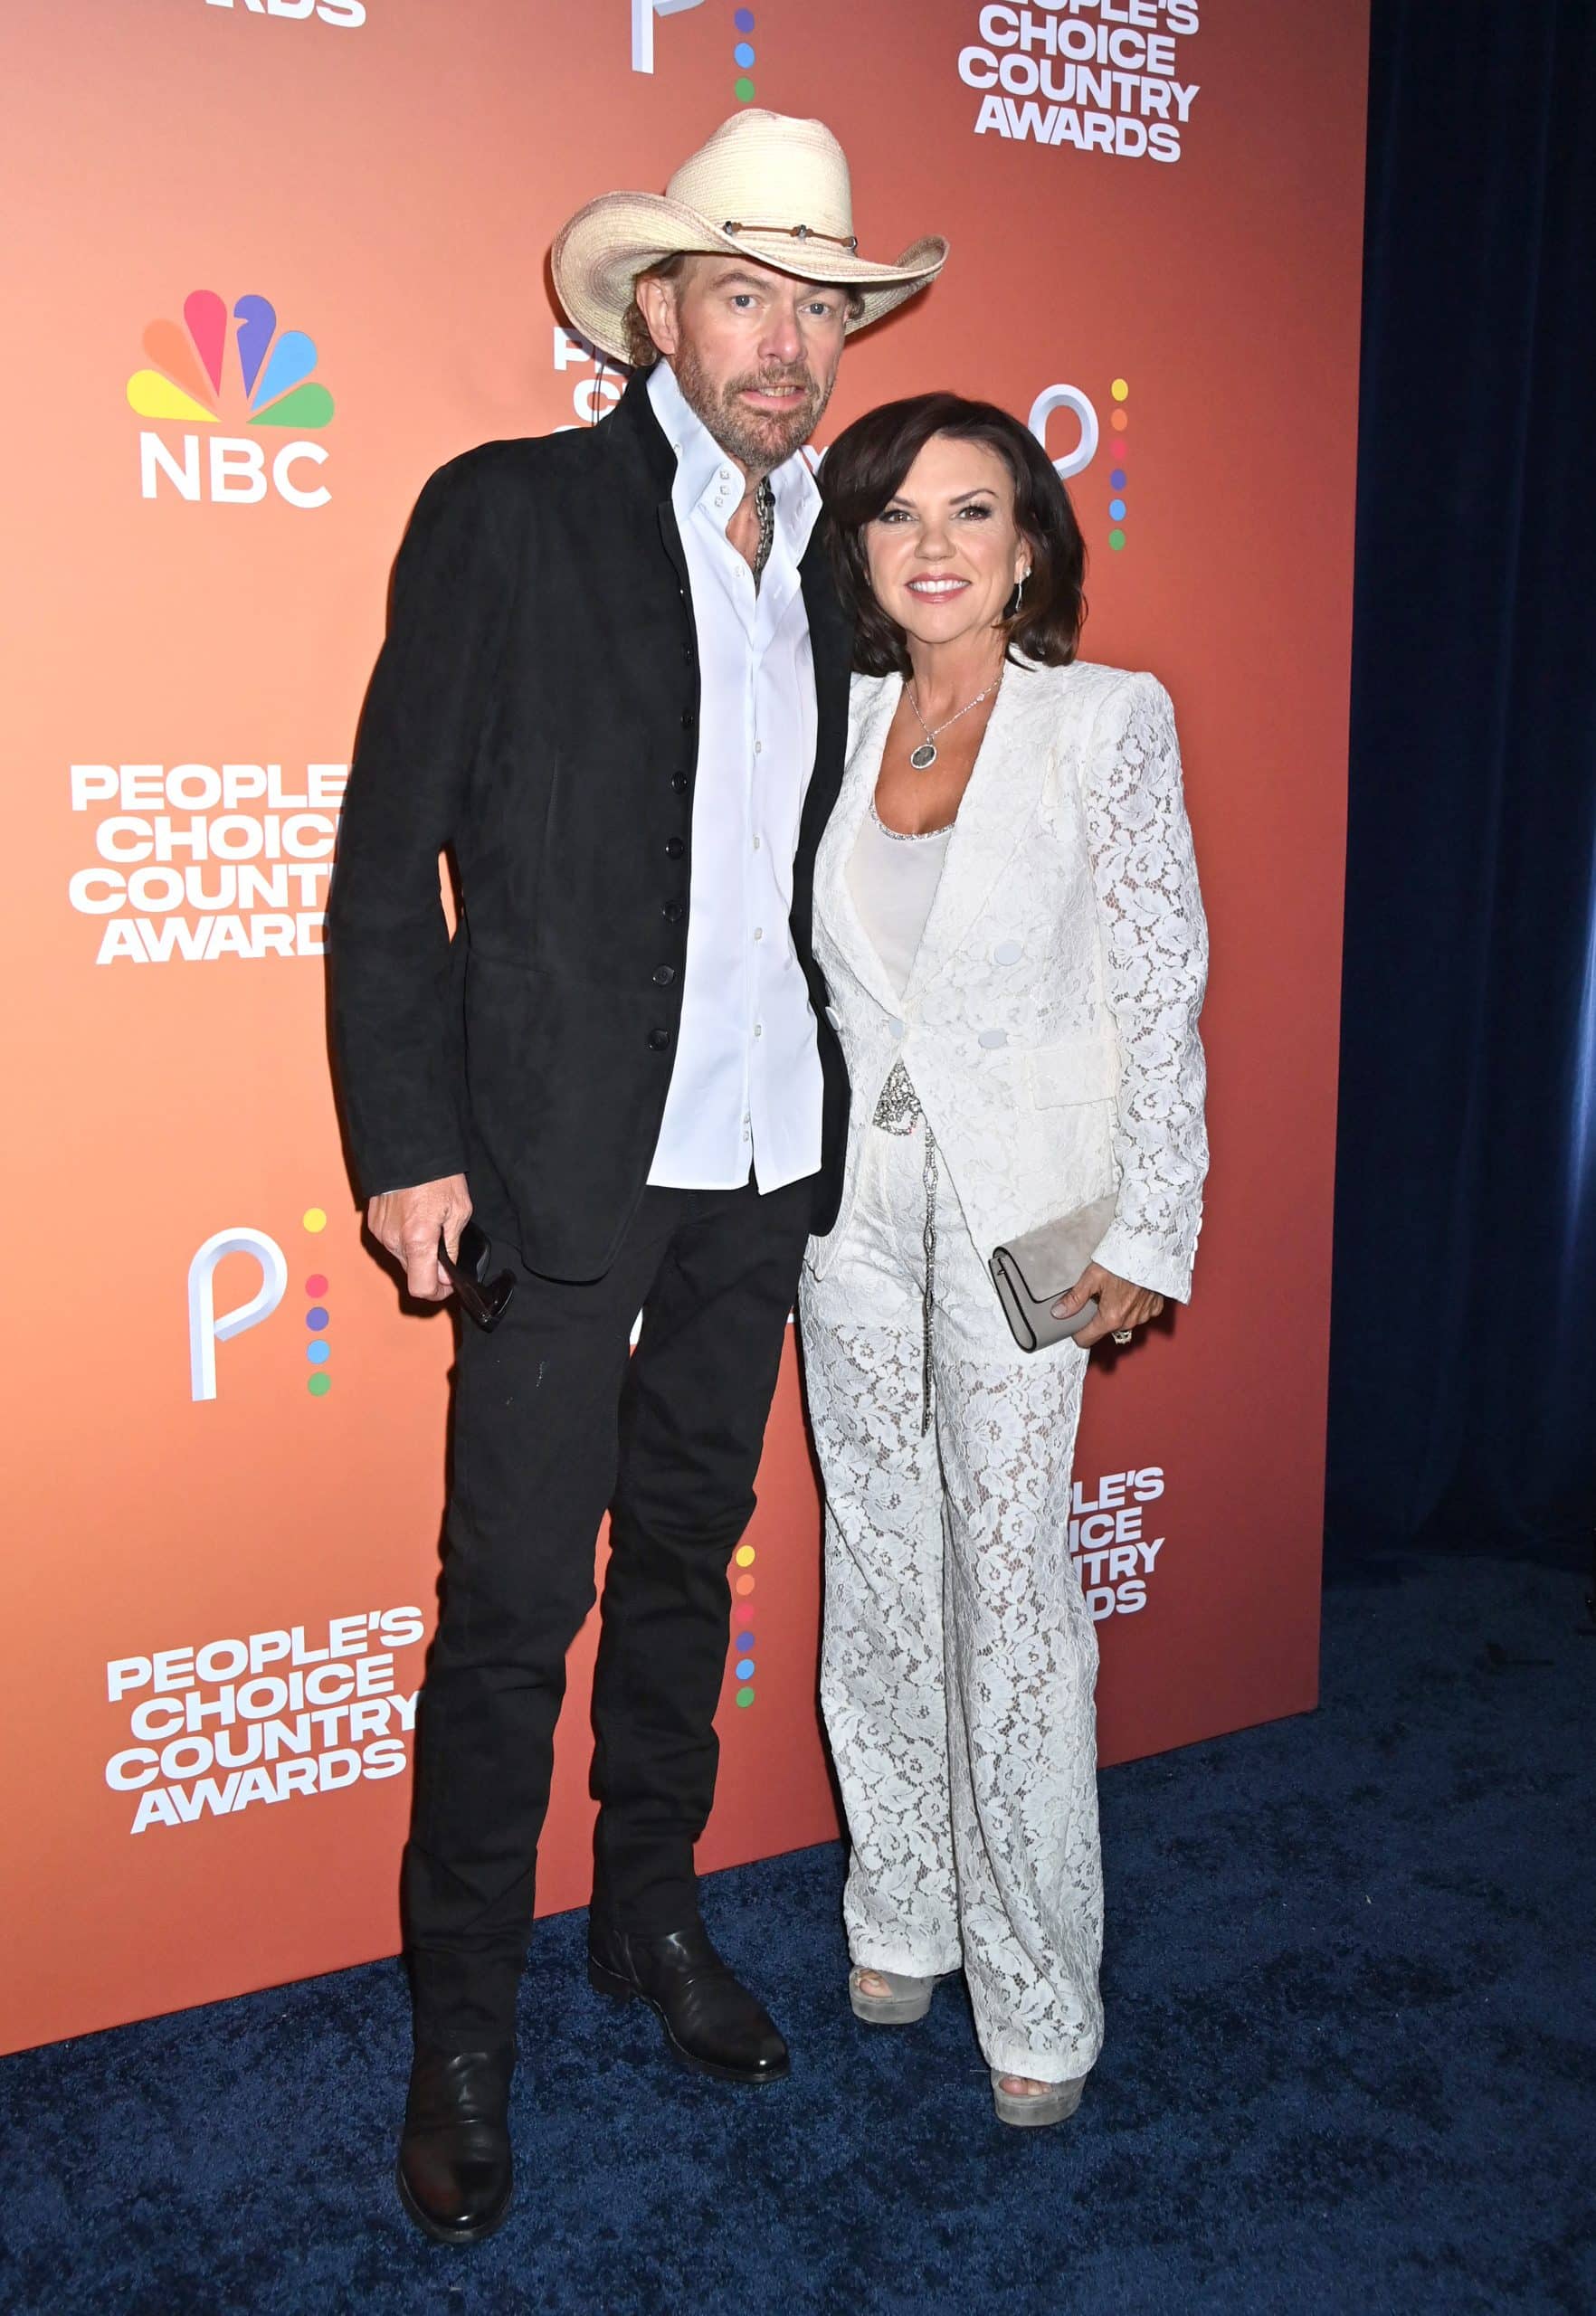 Toby Keith's wife Tricia attends the 2023 People's Choice Country Awards with him